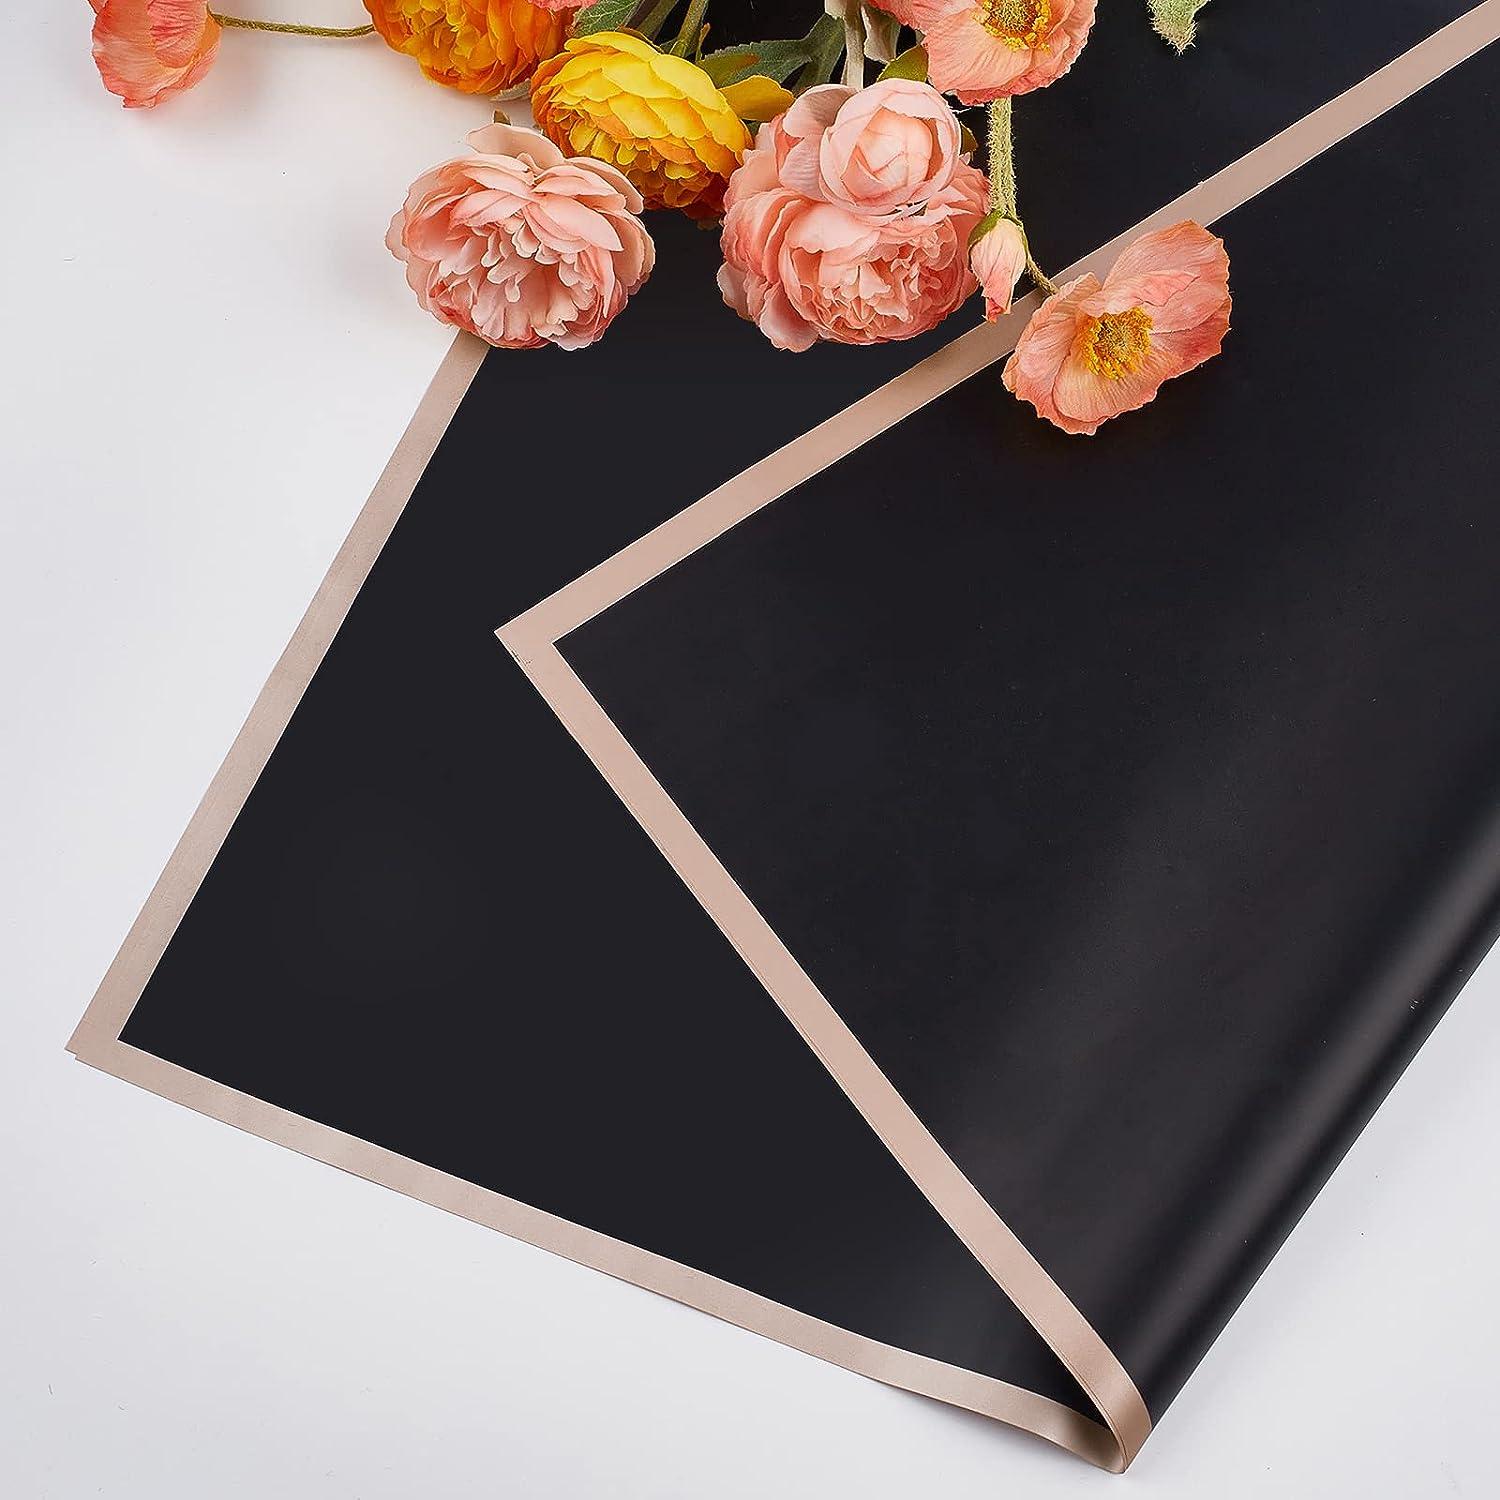 20 Sheets White Frosted Flower Wrapping Paper Florist Bouquet Supplies  Waterproof Floral Wrapping Paper with Black Edge,Florist Bouquet  Supplies,22.8x22.8 inch 